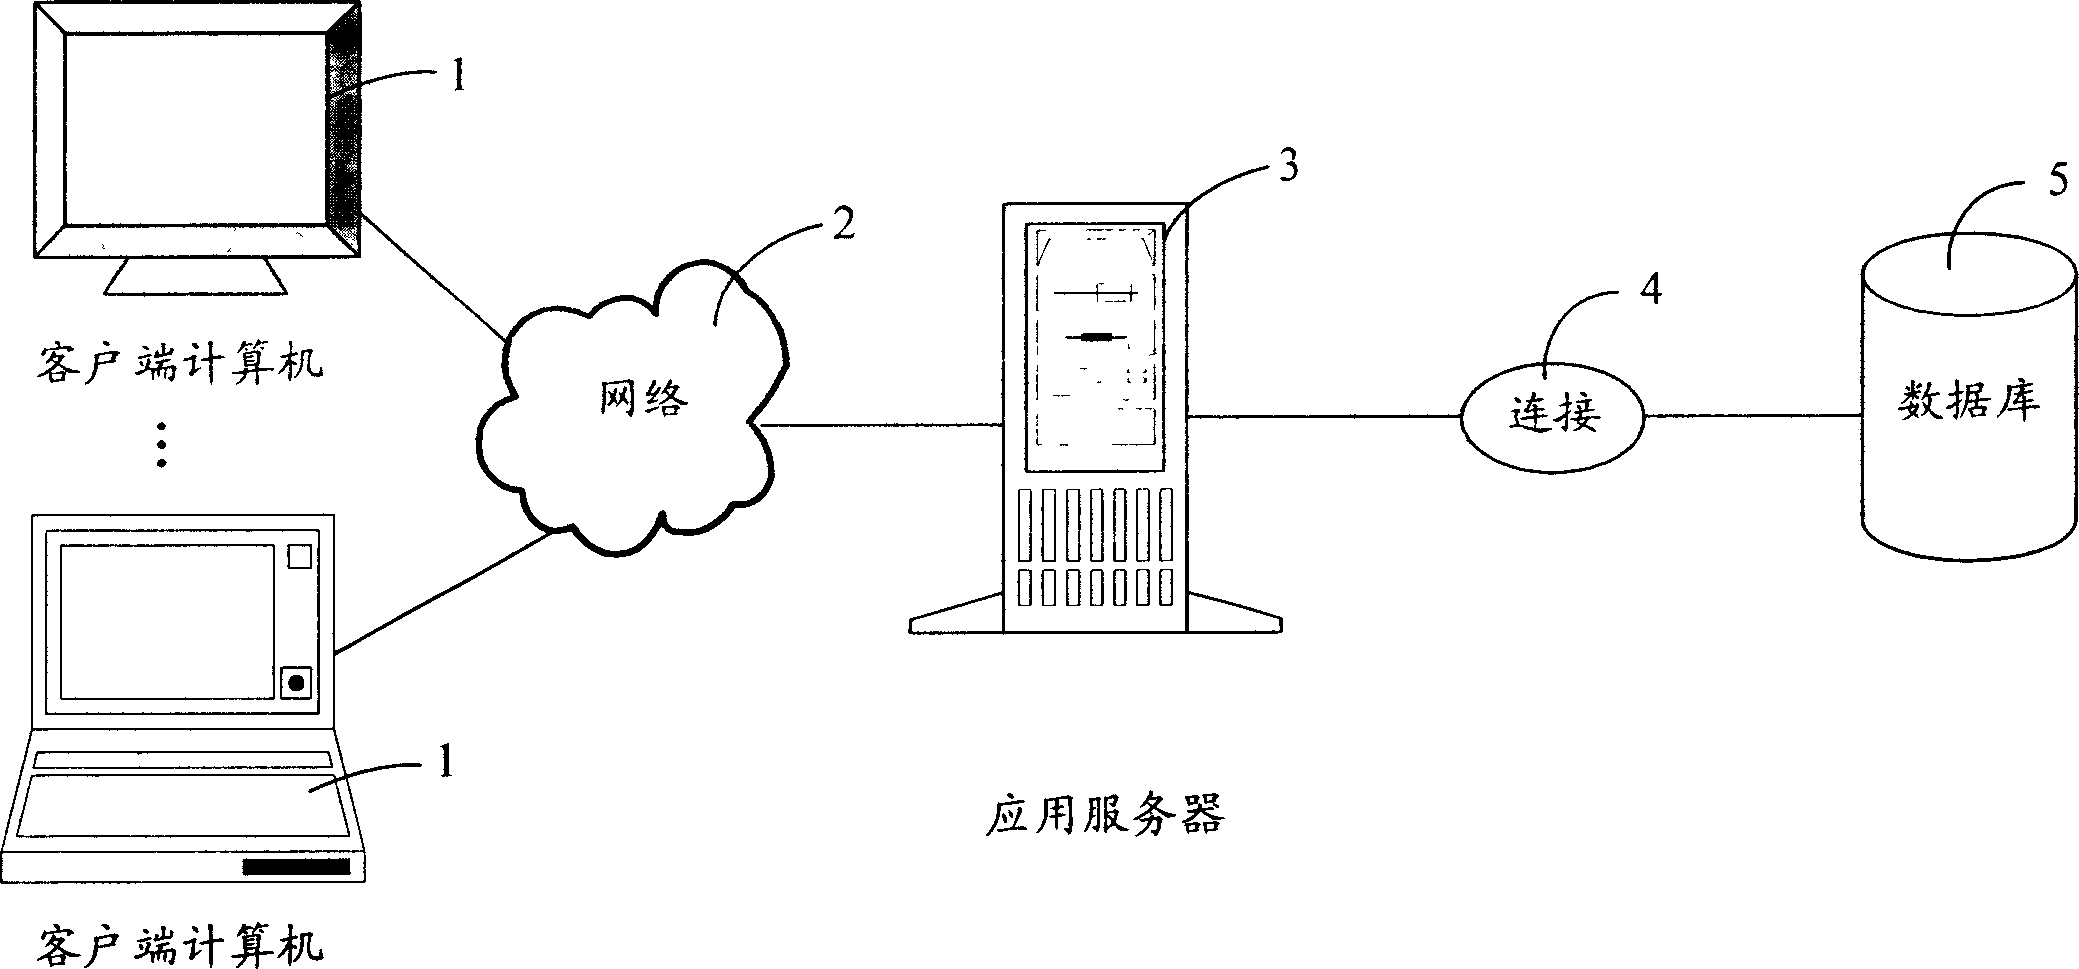 Patent search system and method thereof